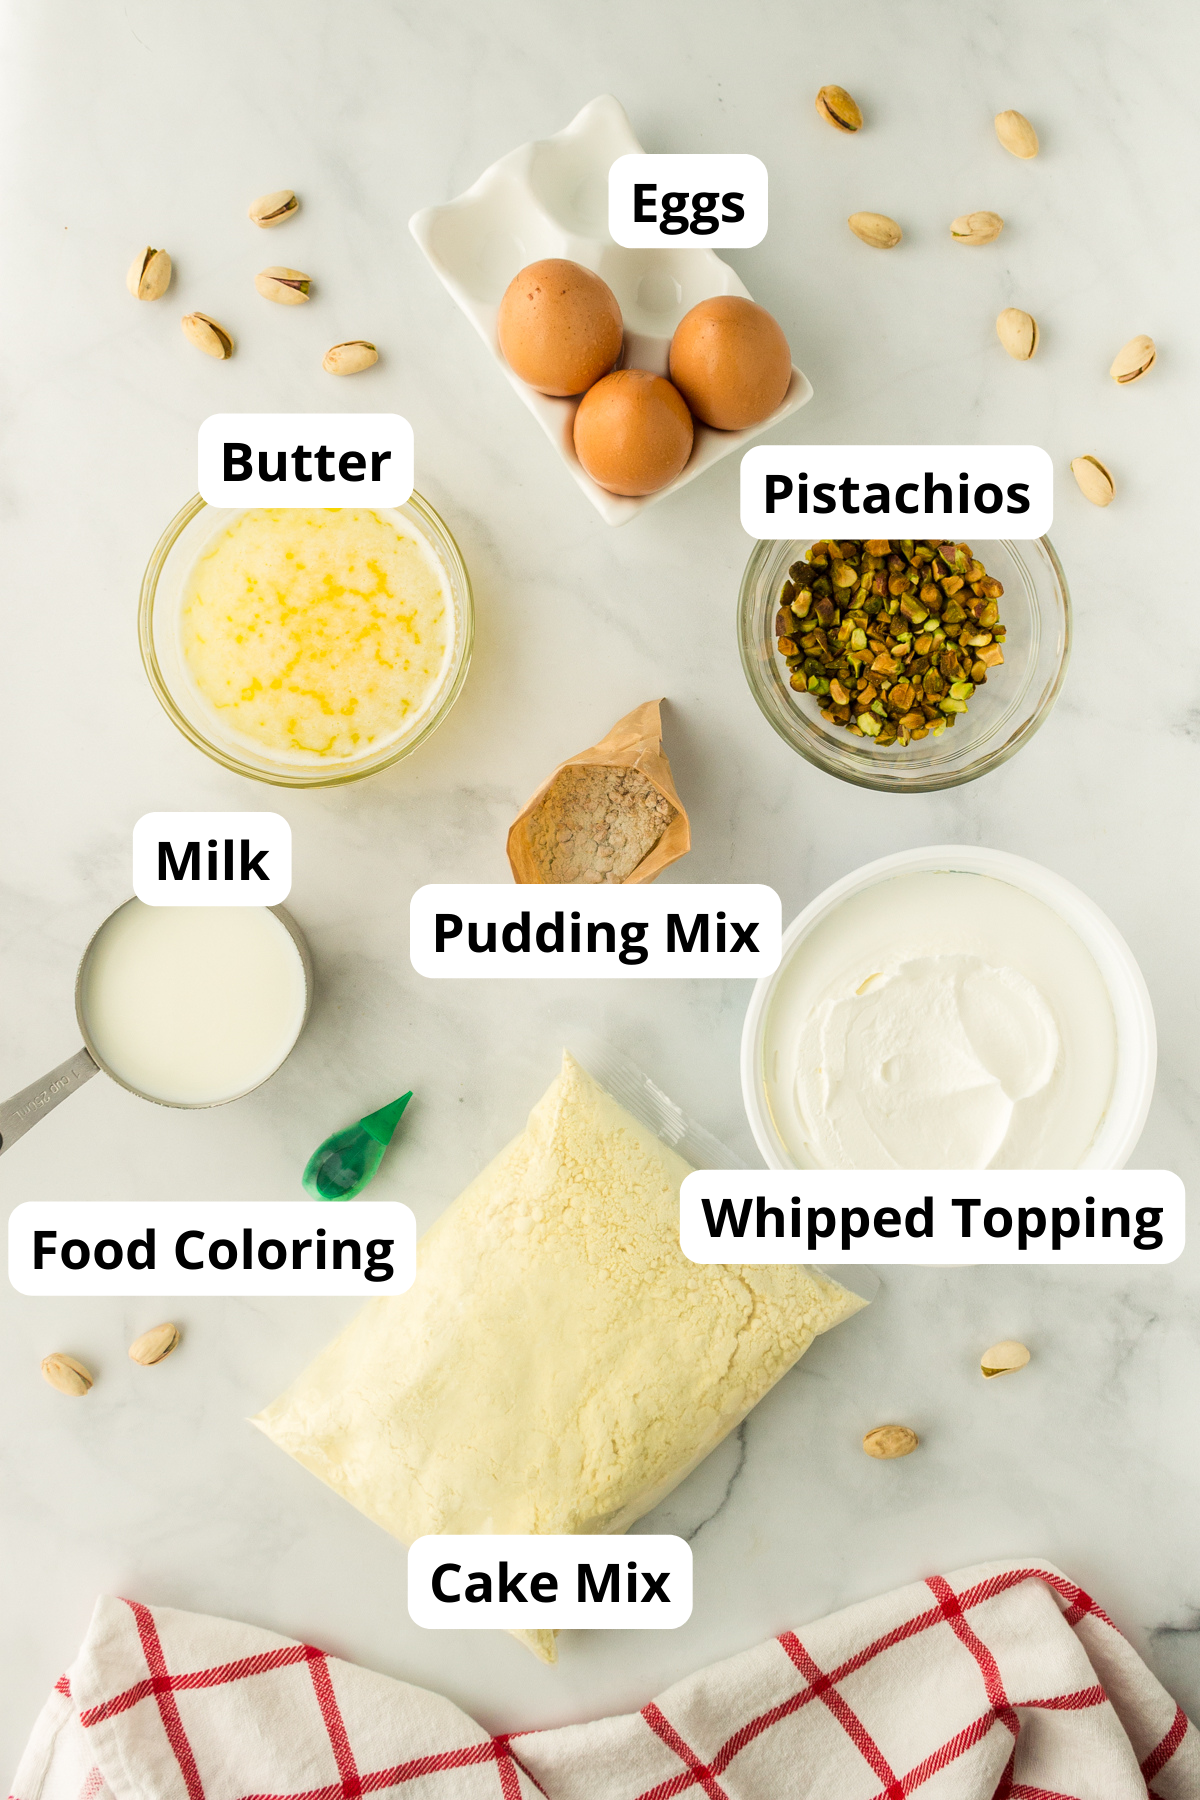 ingredients needed to make this pistachio cake. This is a boxed cake mix with pudding added to it.